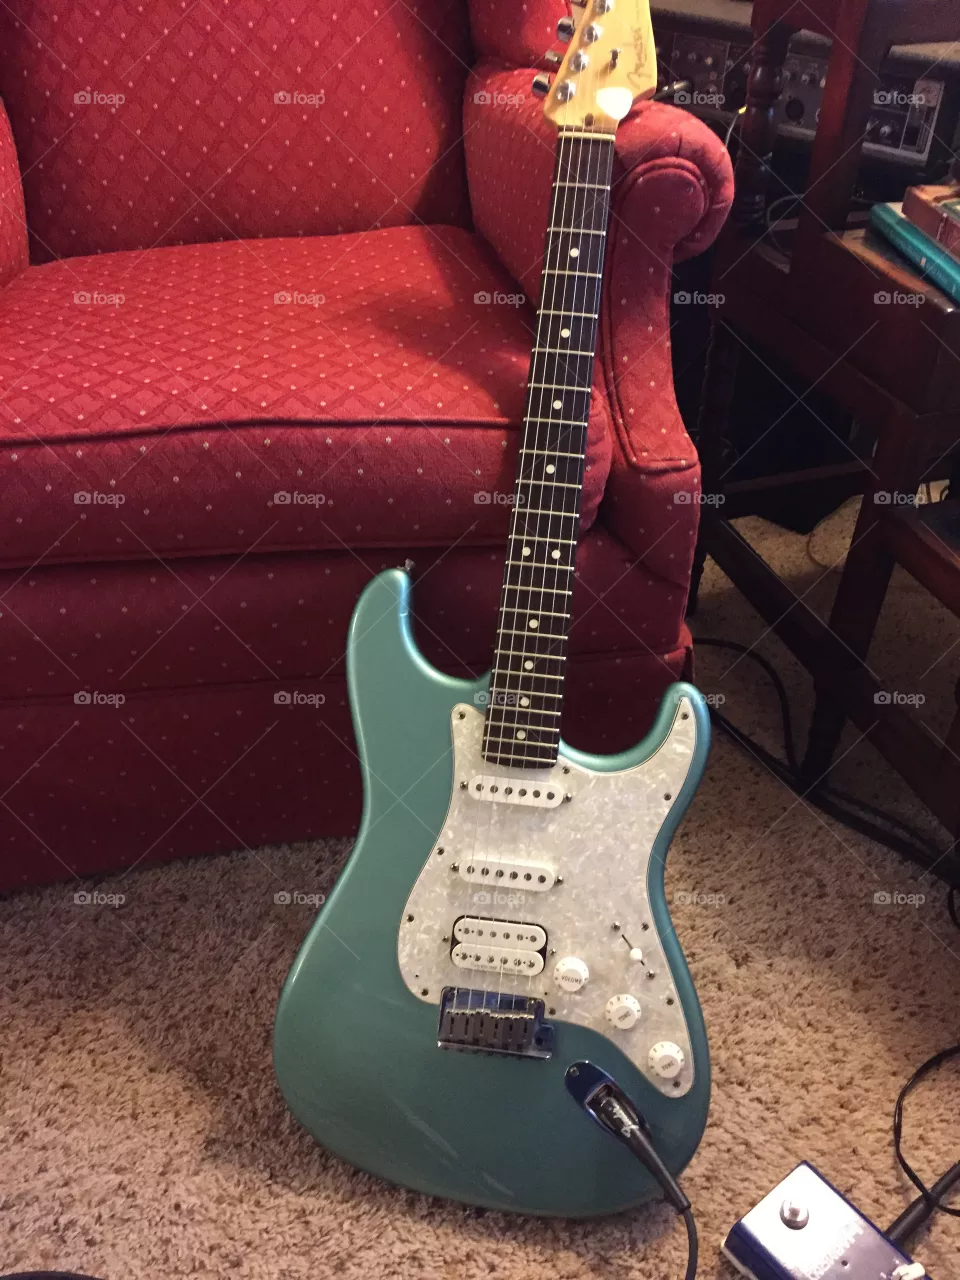 A blue electric  stratocaster guitar leaning against the chair tuned up plugged in and waiting to be played.